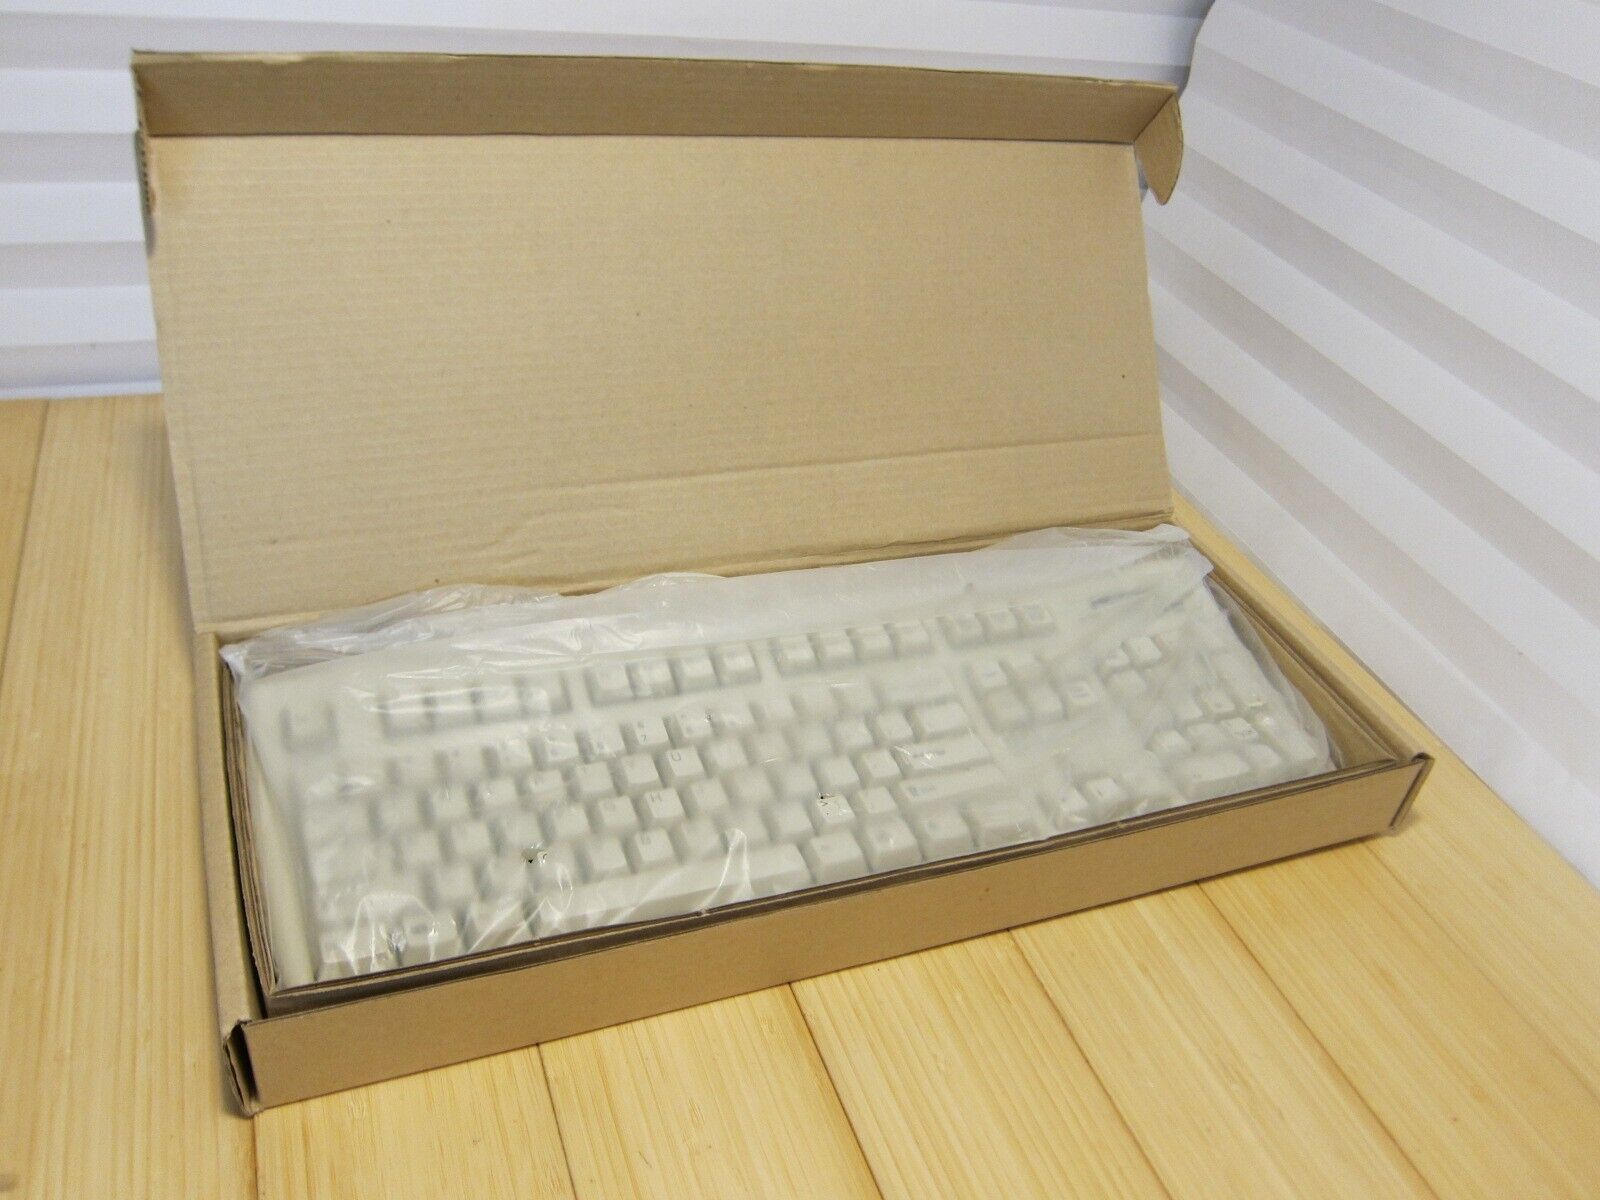 NOS Vintage Retro Micron NMB Windows Keyboard RT5158TW PS/2 In Box (2 of 2)